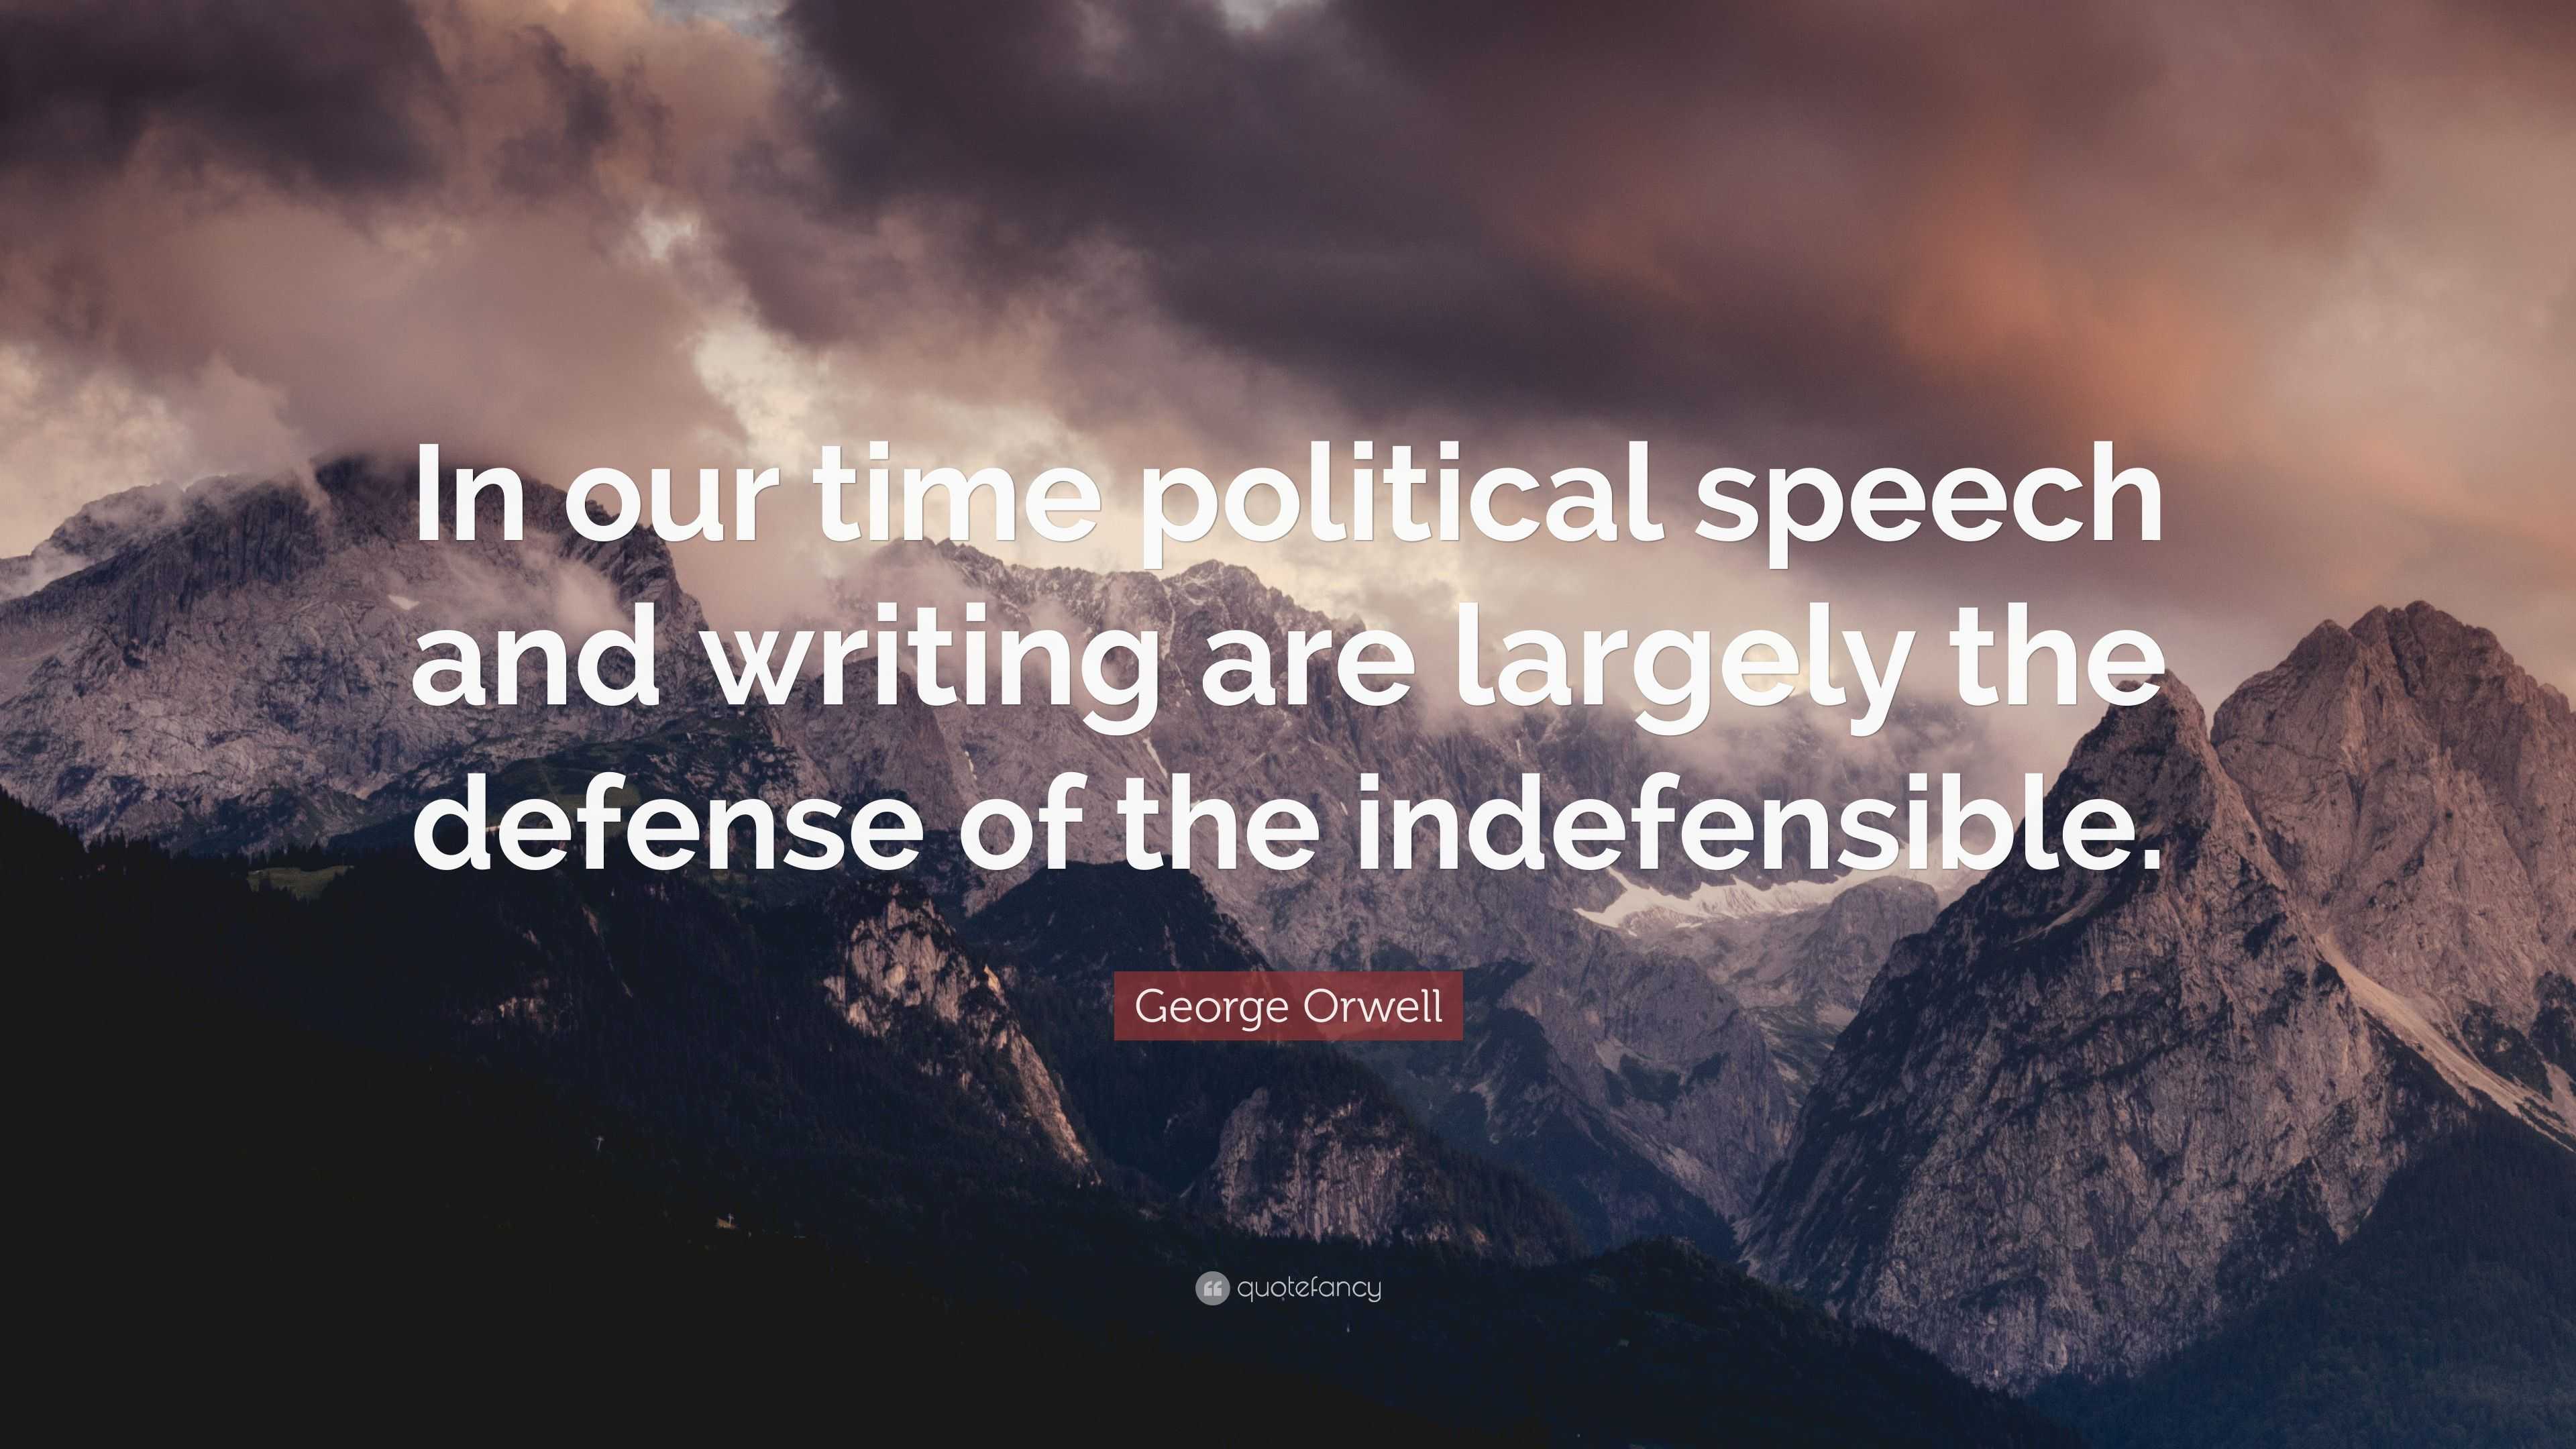 political speech and writing are largely the defense of the indefensible meaning